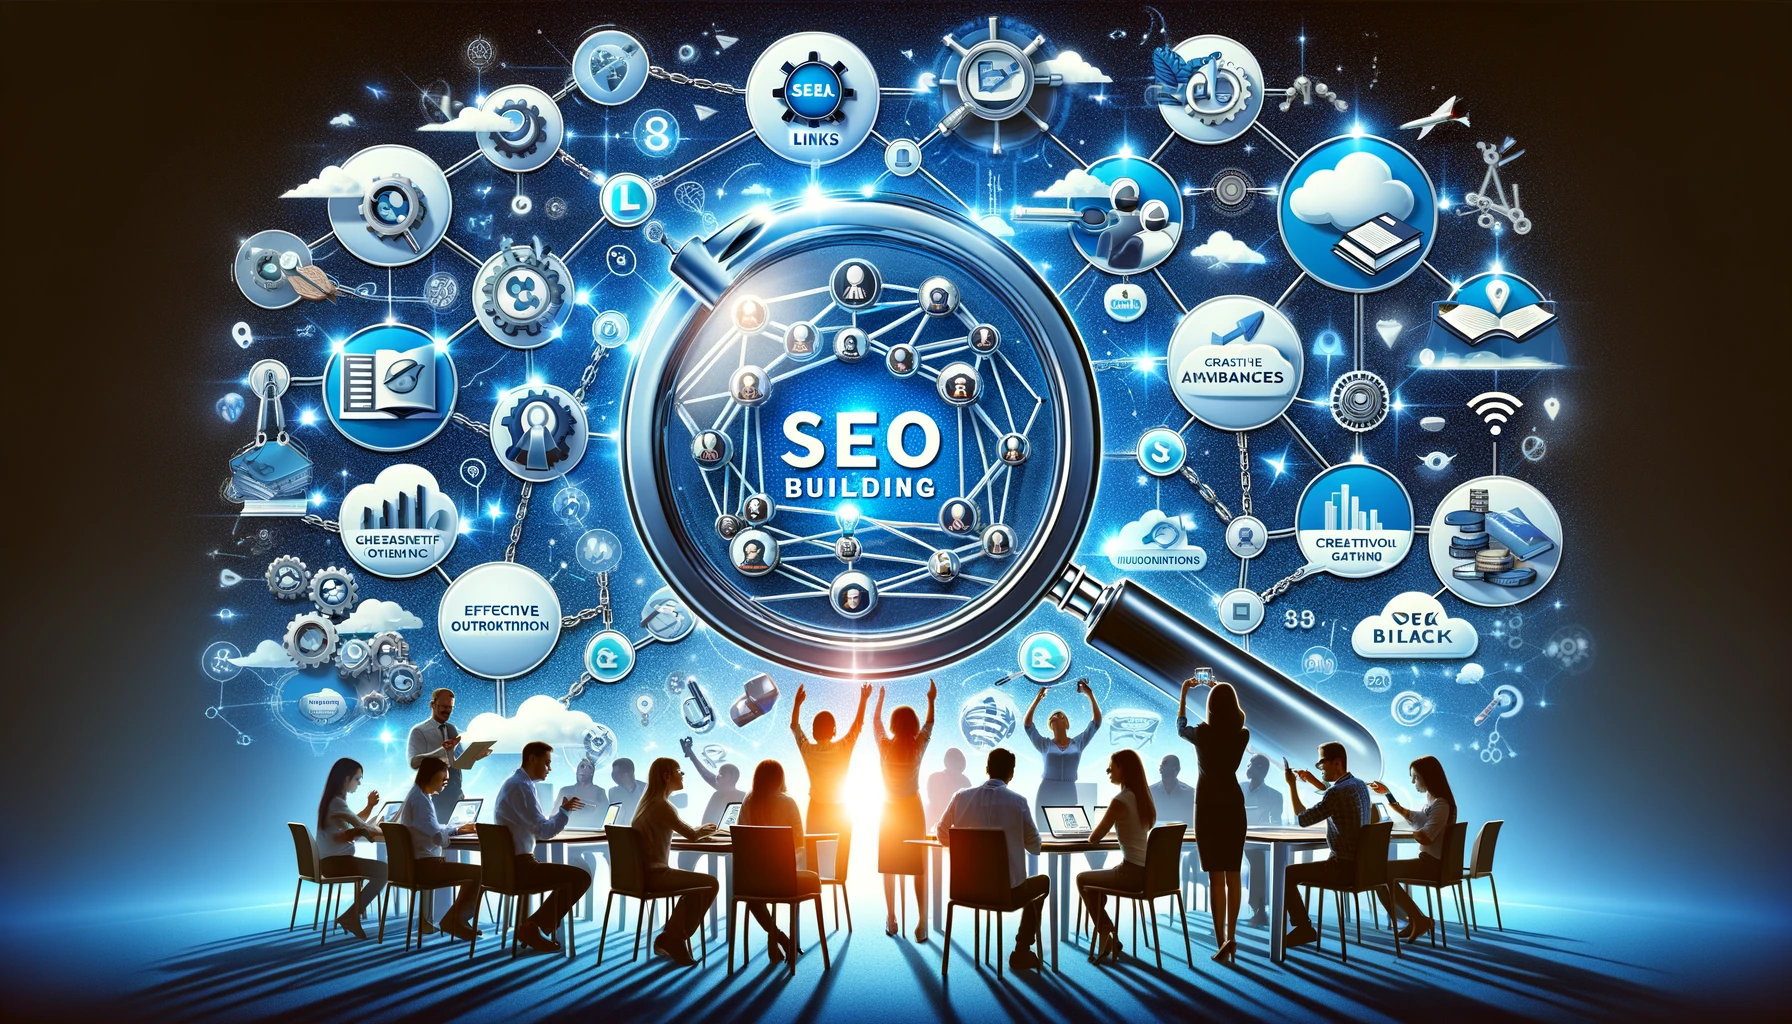 Digital illustration visualizing the concept of Building Quality Links for SEO, featuring interconnected networks, a magnifying glass over valuable links, and a community of marketers engaging in content creation and collaboration.